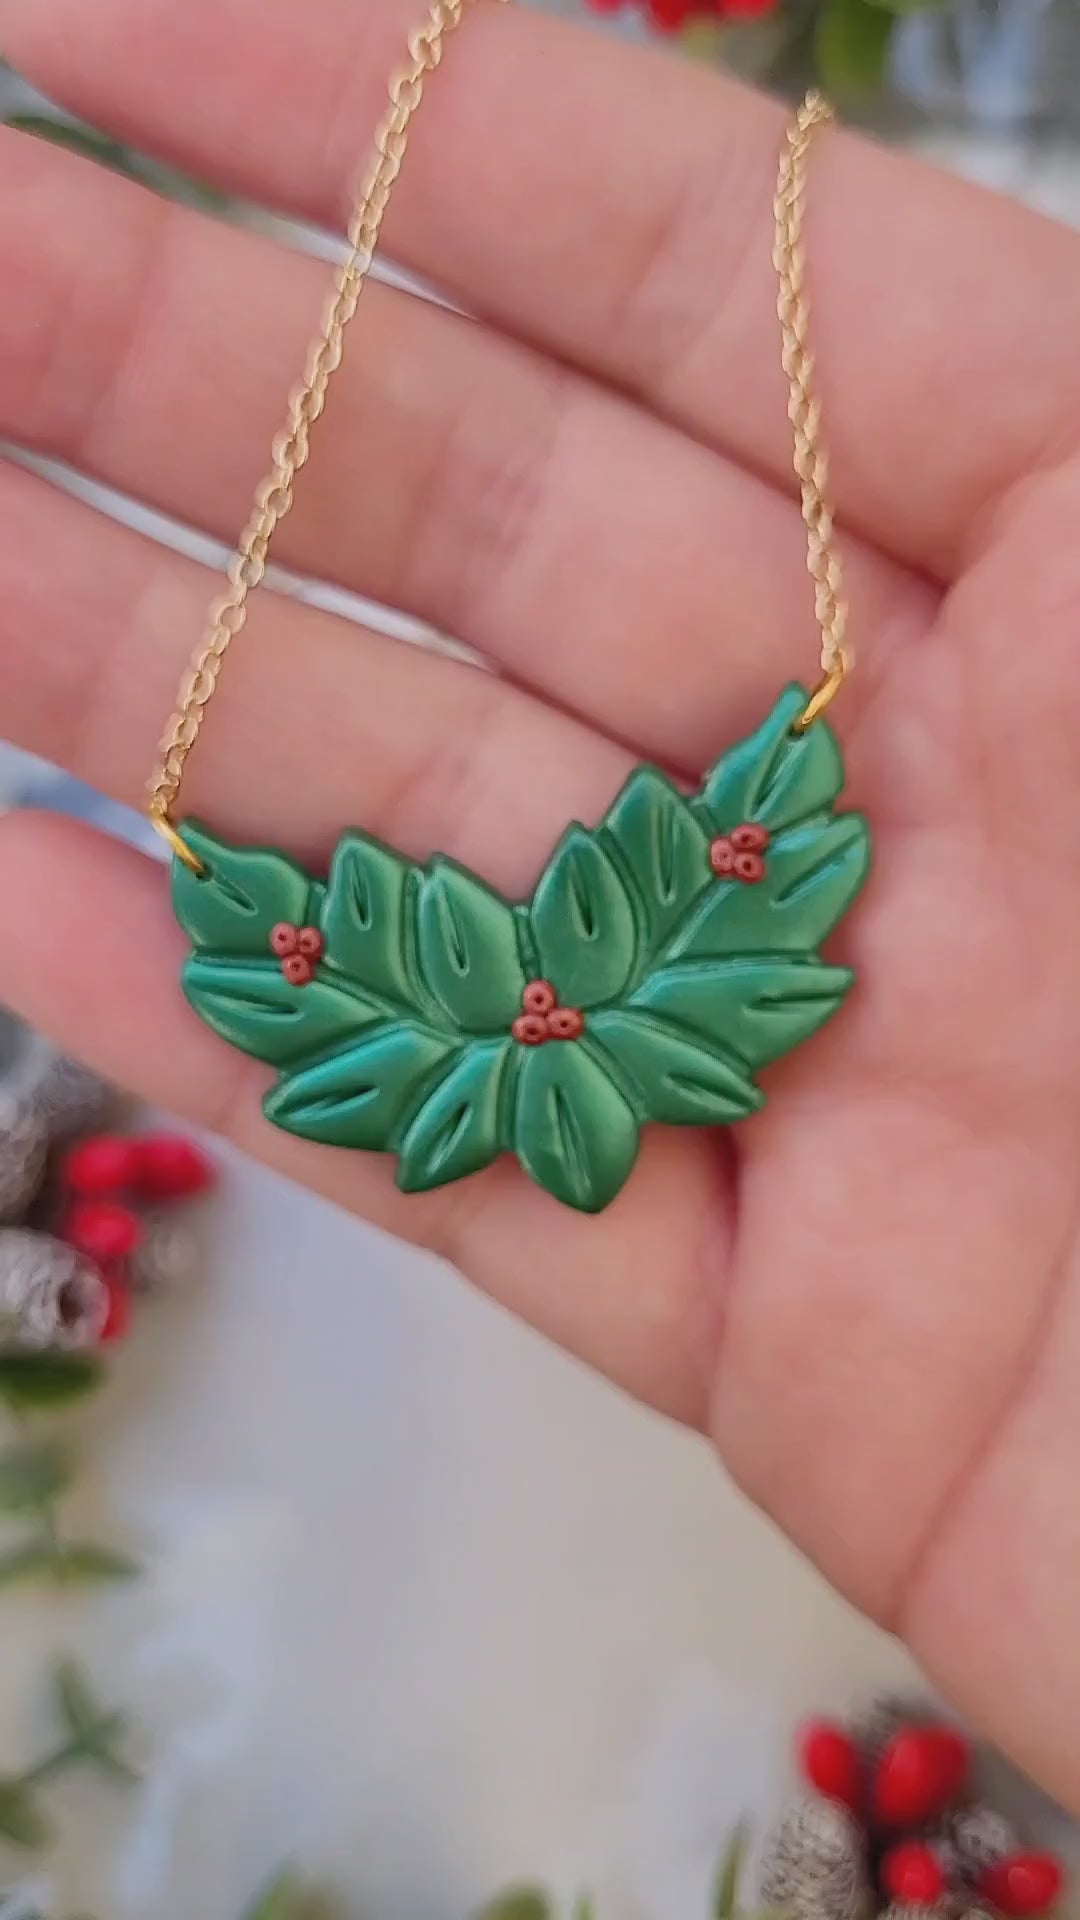 video close up of Metallic green and red holly wreath necklace on a marble background surrounded by foliage.